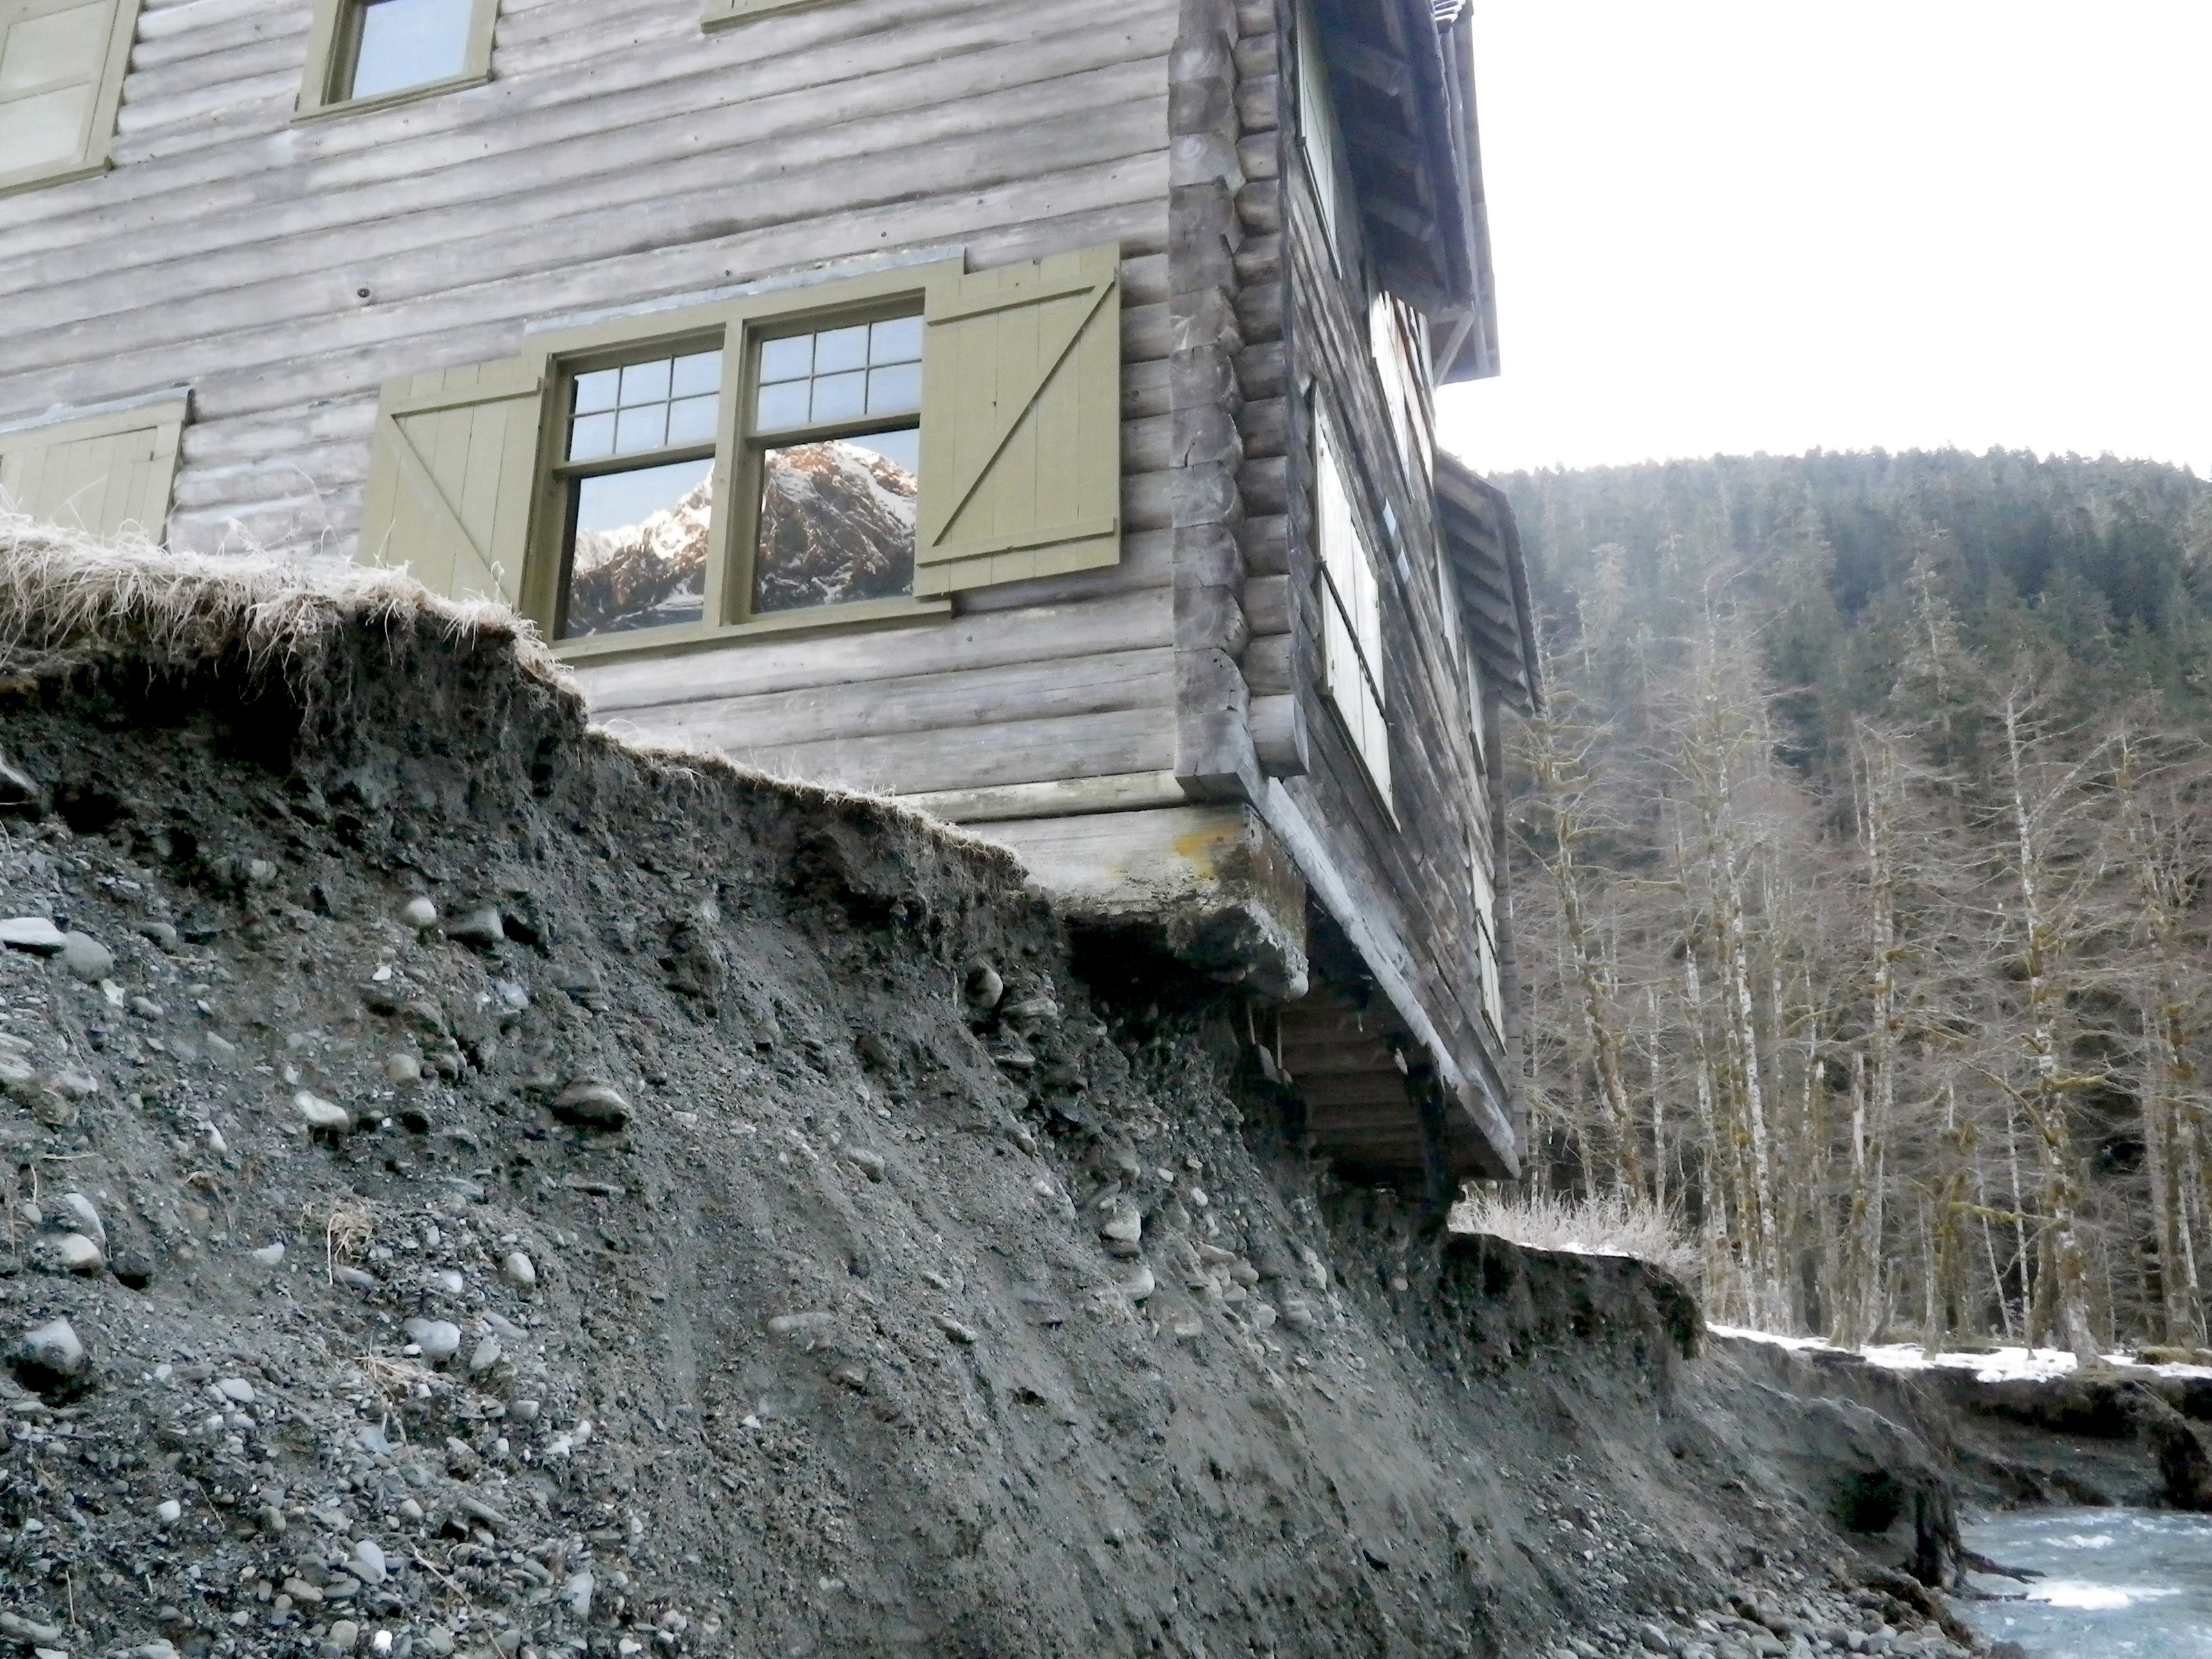 The Enchanted Valley Chalet is shown precariously over the bank of the changing East Fork Quinault River last March.  —National Park Service photo